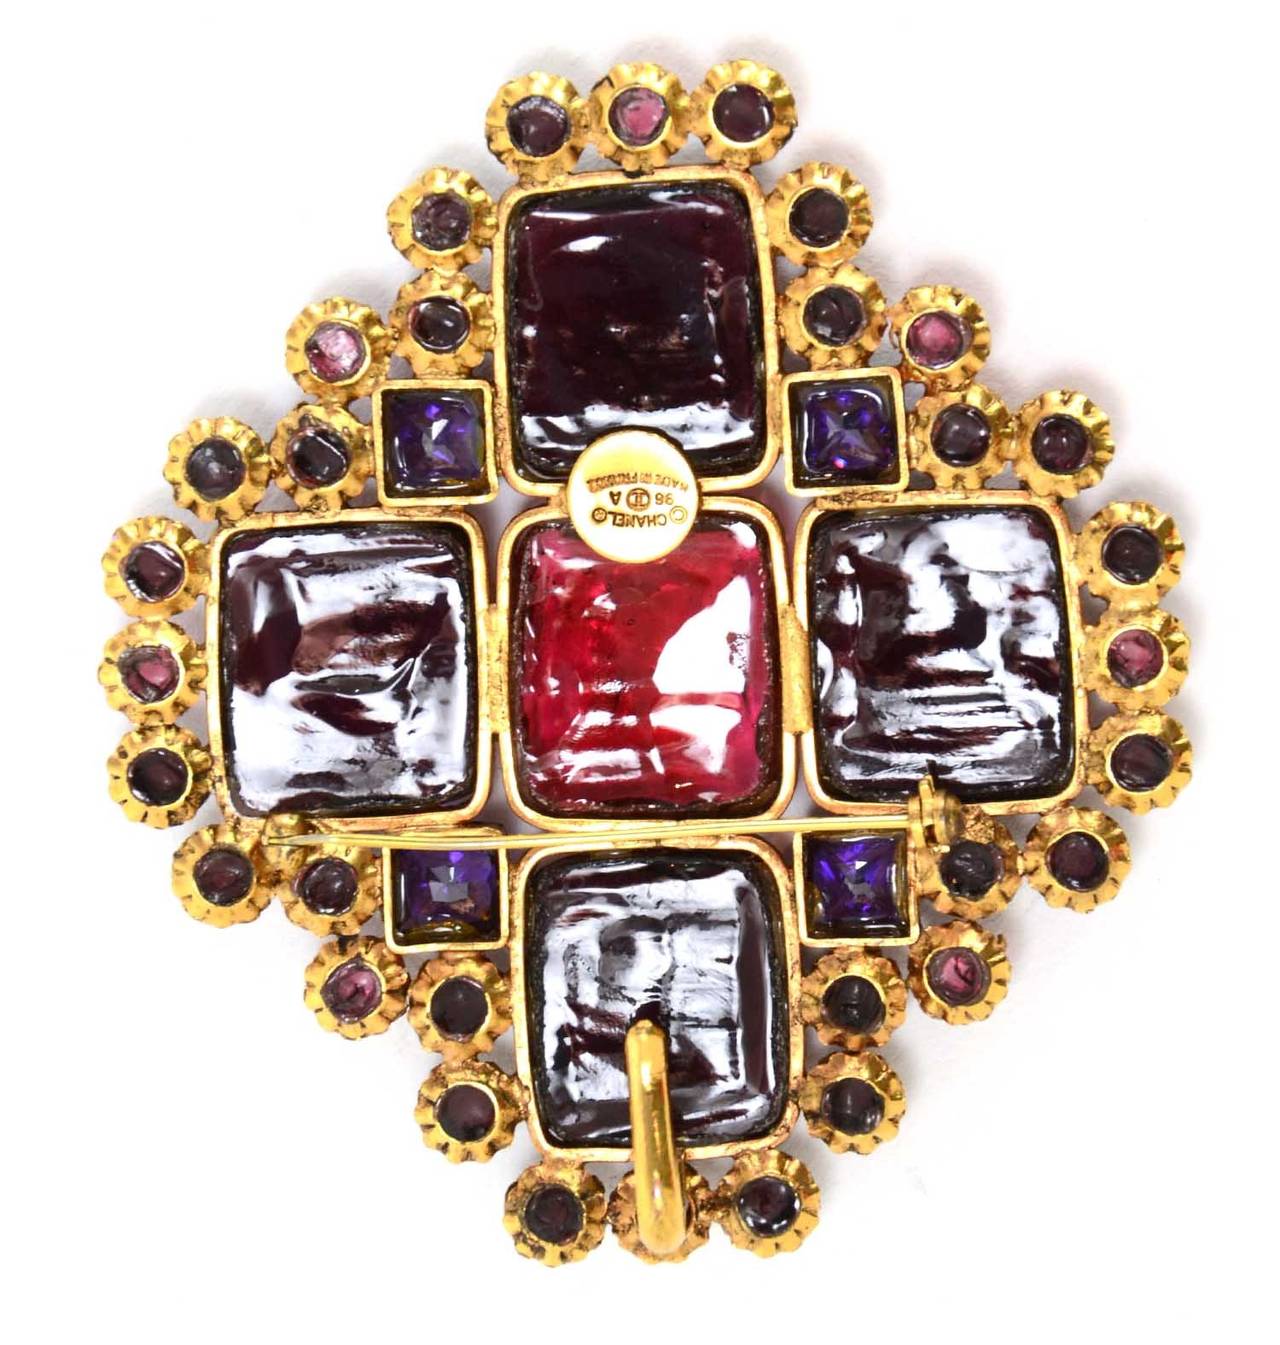 Chanel Vintage '96 Red & Purple Gripoix Brooch

    Made in: France
    Year of Production: 1996
    Stamp: 96 CC A
    Closure: Pin back closure
    Color: Brass, red and purple
    Materials: Metal and poured glass
    Overall Condition: